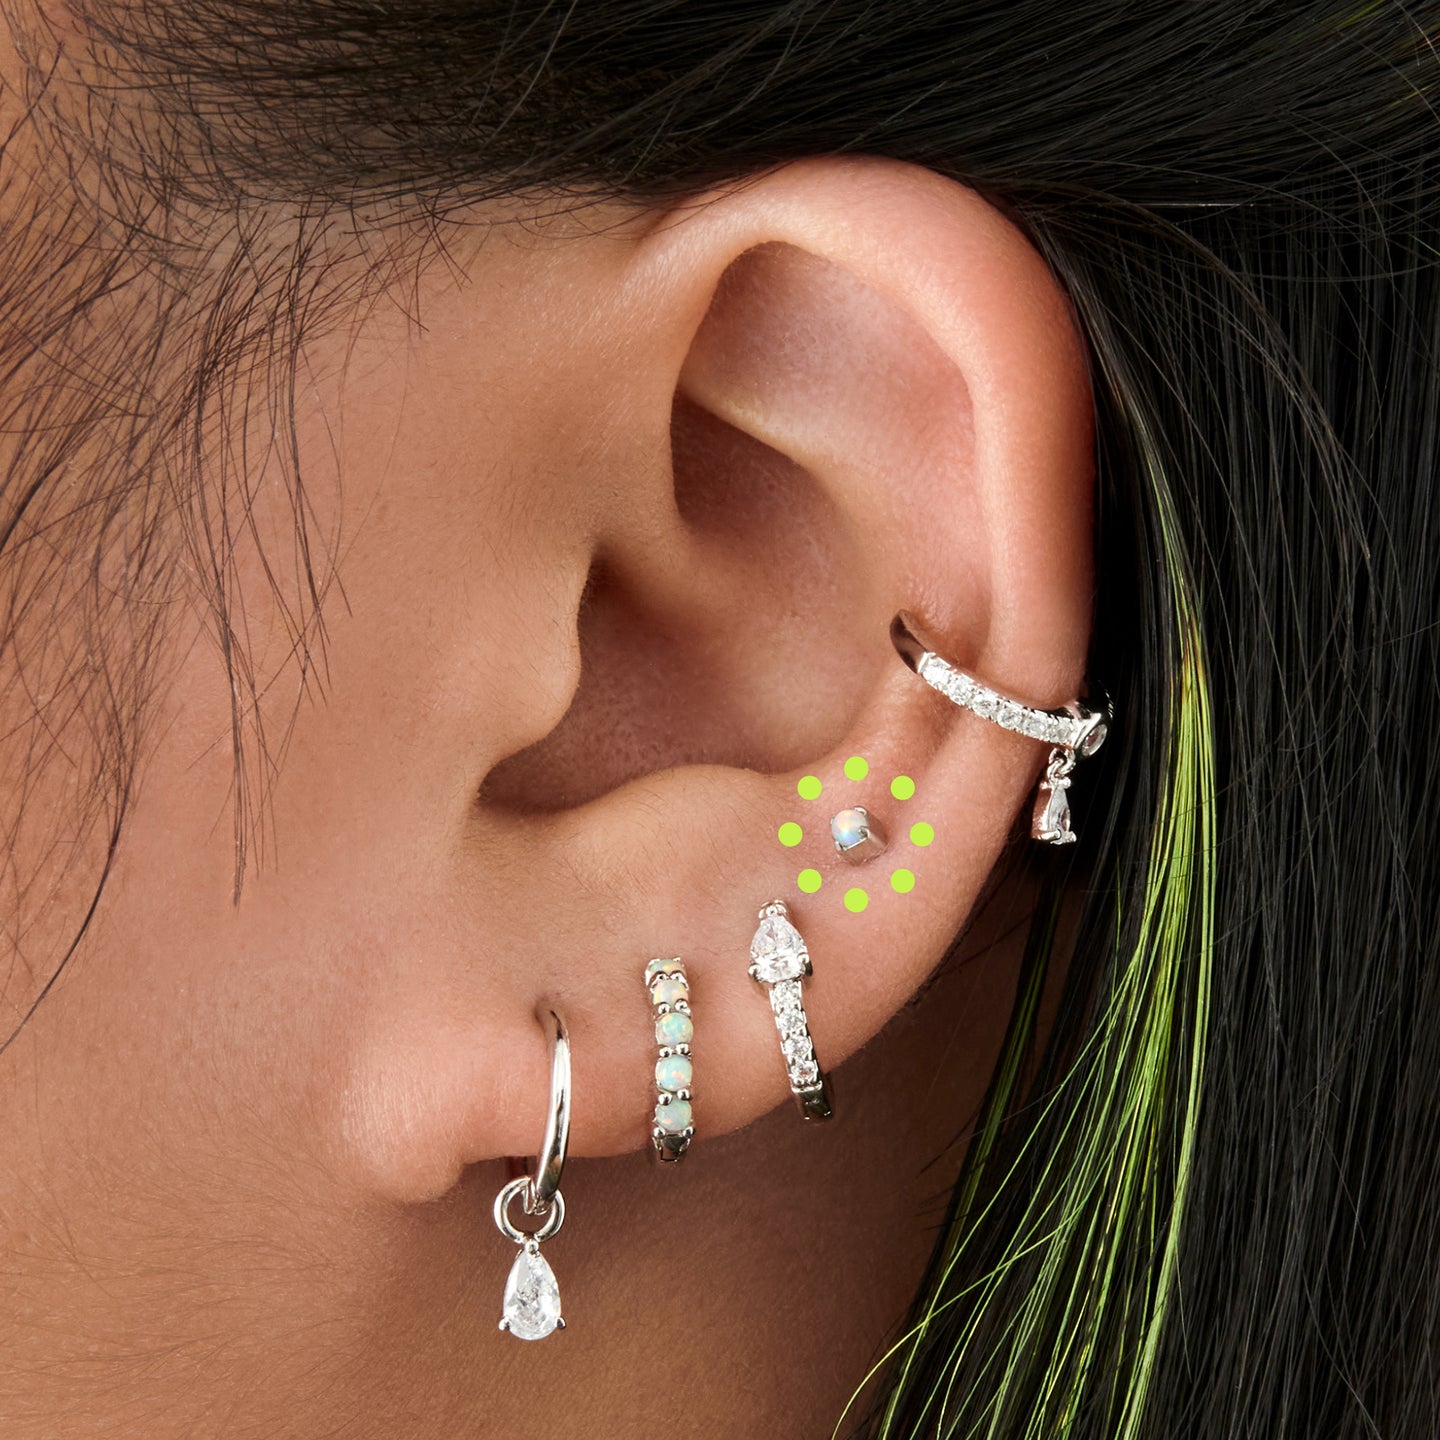 This is an image of a silver/opal flatback top with a silver labret with a circle disc and the 